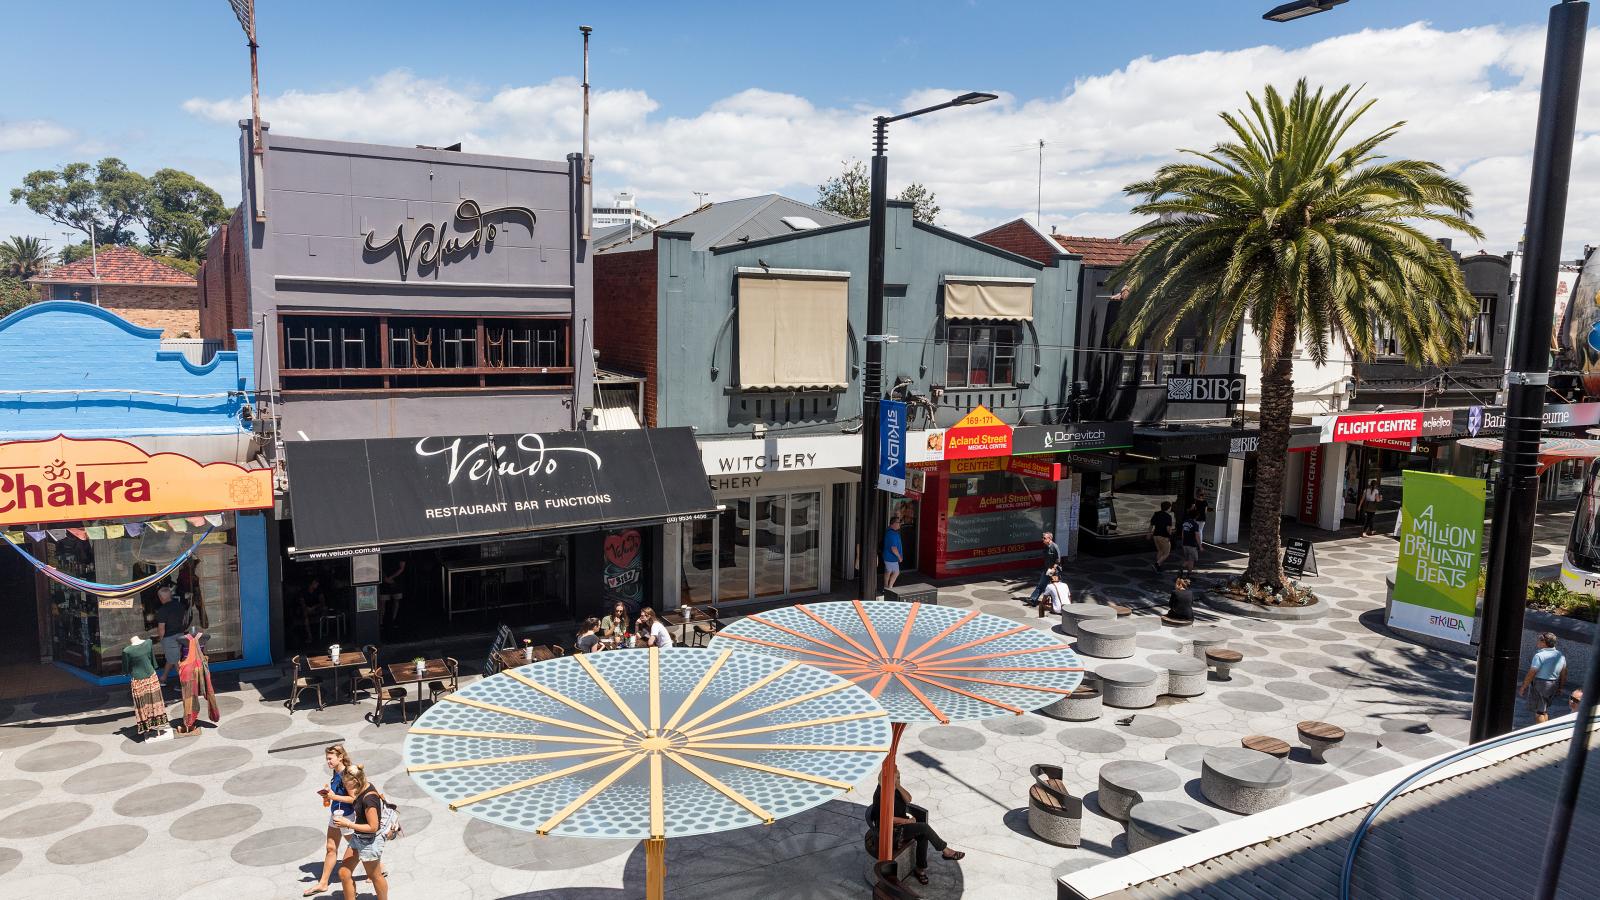 A lively urban street scene on Acland Street in St Kilda features shops, cafes, and restaurants with colorful geometric-patterned umbrellas. Pedestrians stroll along the pavement while others sit at outdoor tables. Palm trees and bright signage enhance the vibrant atmosphere on a sunny day.